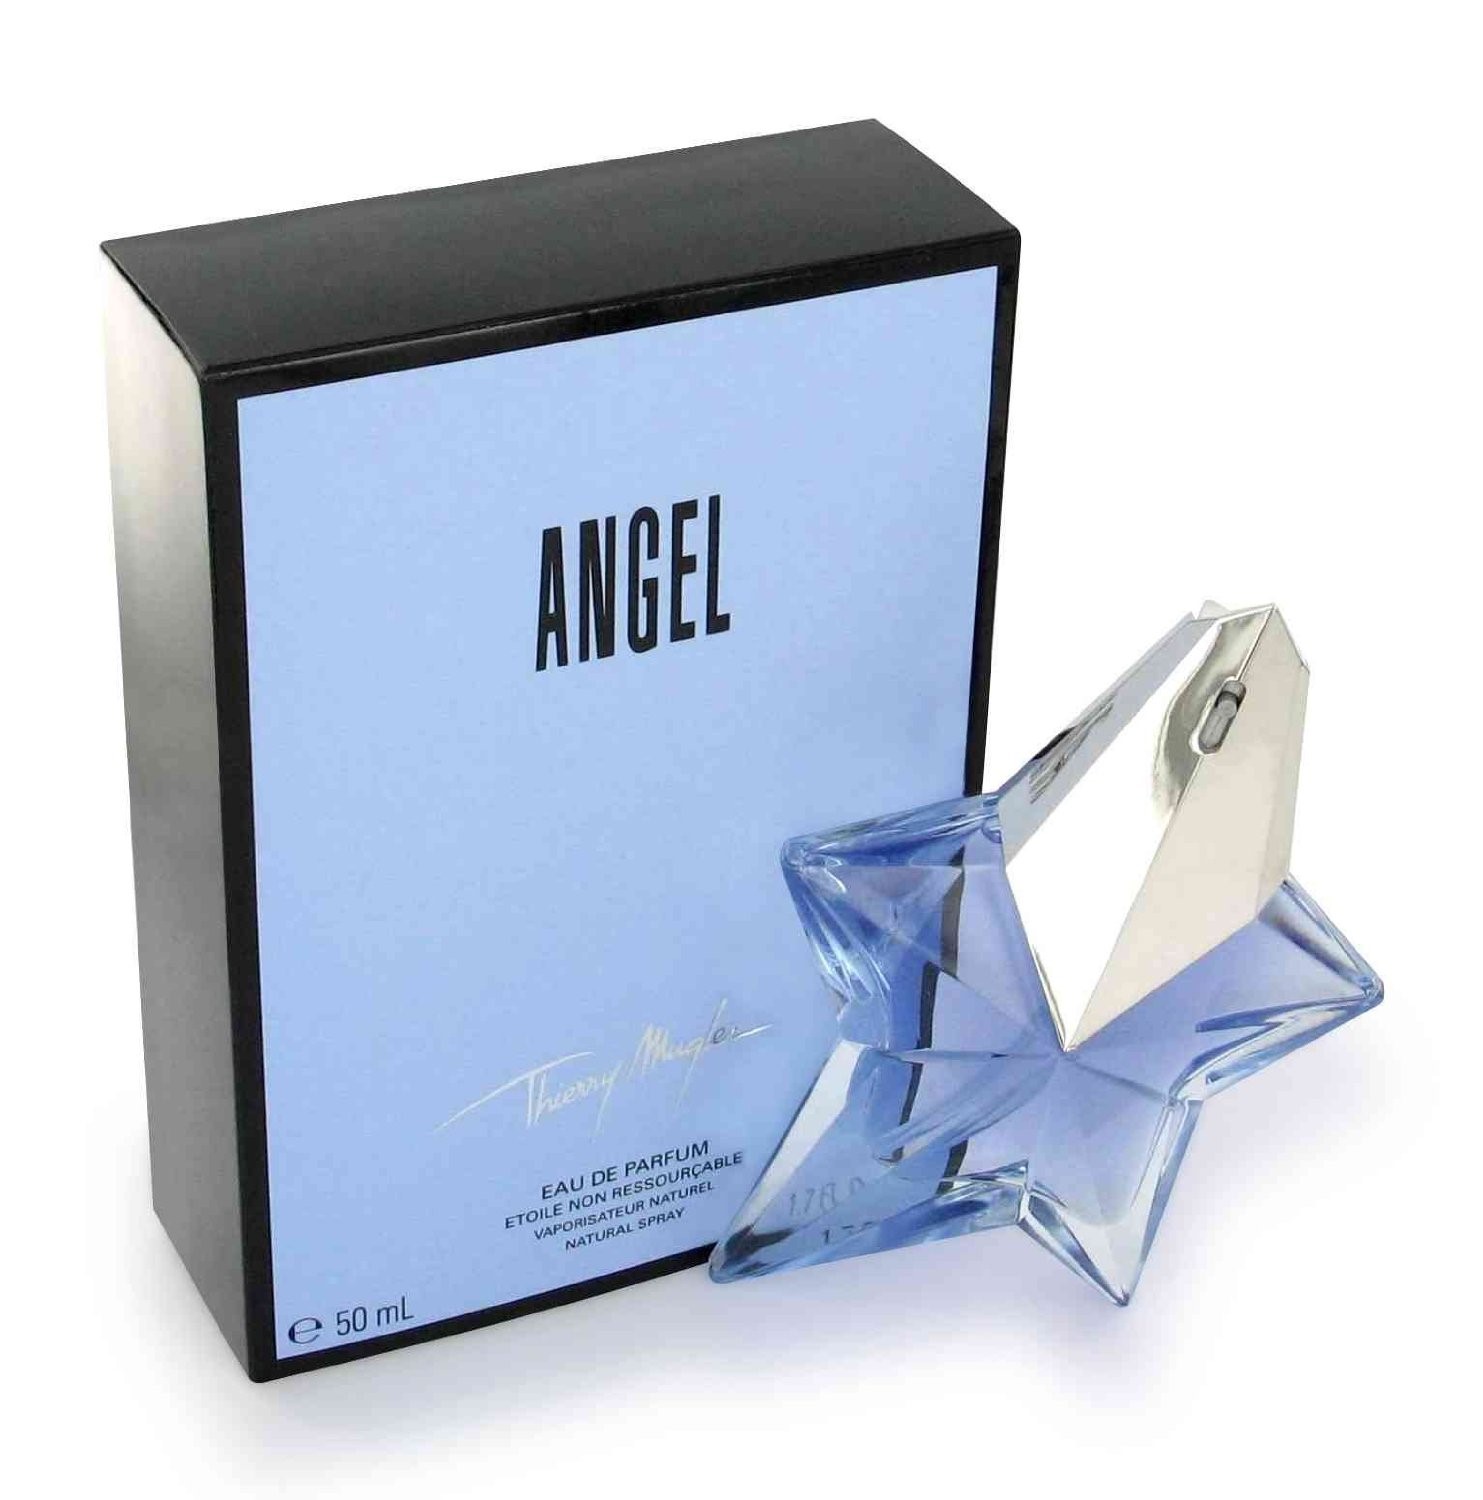 A Men Rubber Flask for Men By Thierry Mugler 1.7 oz EDT Refillable - image 2 of 3